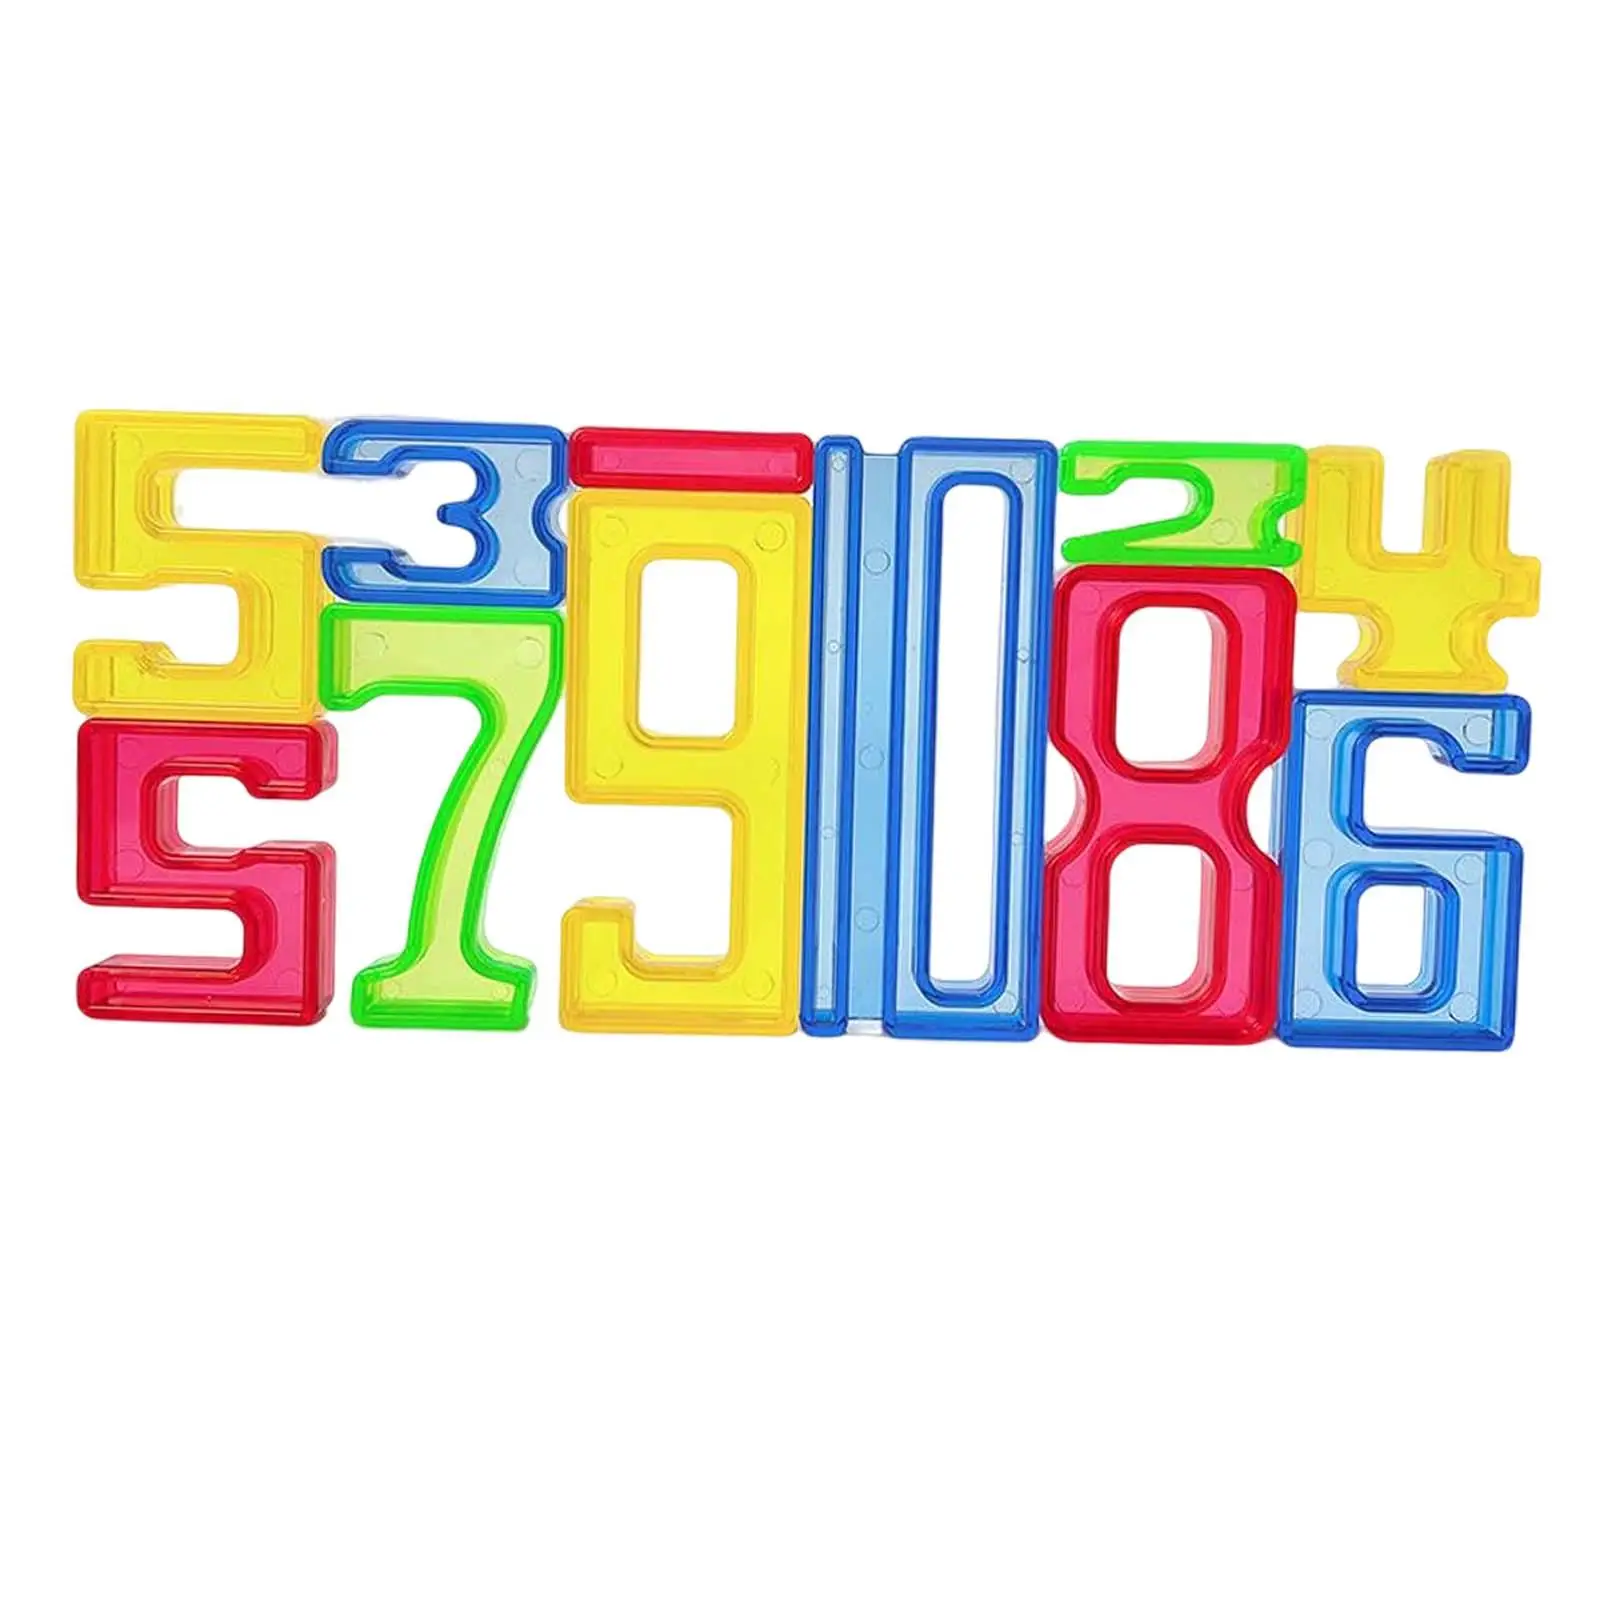 Number Building Blocks Block Math Digital Toys Math Unique Number Manipulatives math for Games Training Party